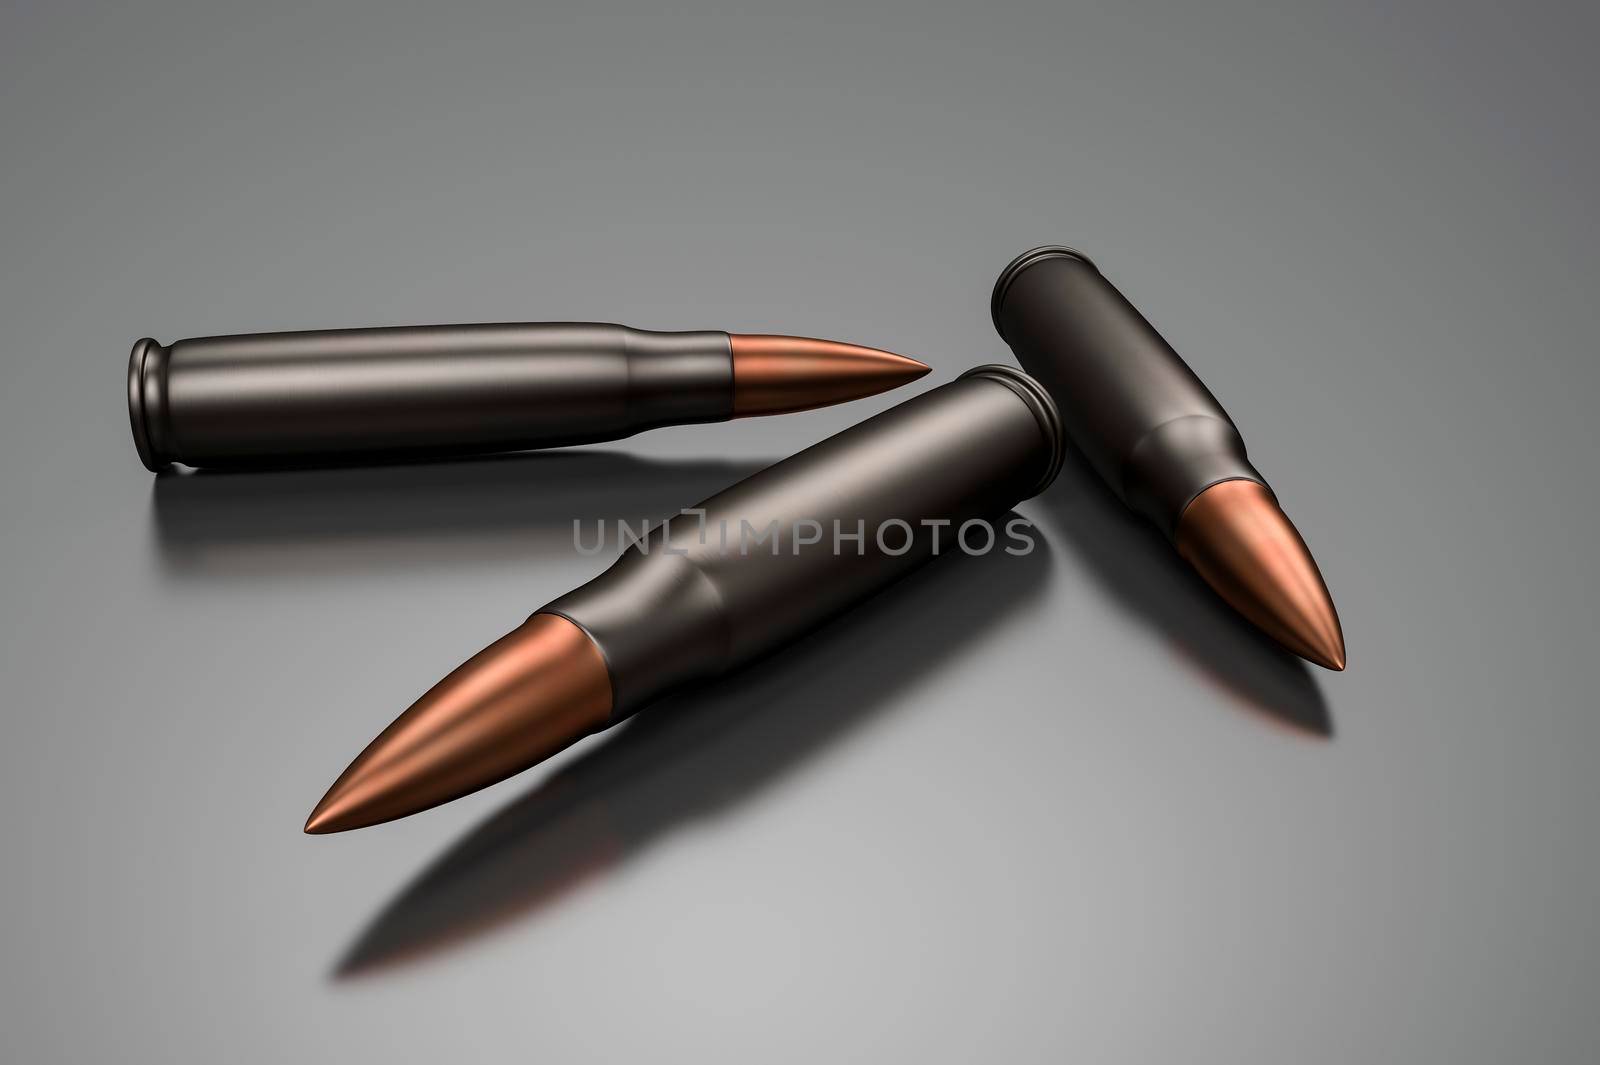 Three 3D large-caliber cartridges for a rifle or machine gun. Lethal weapons and ammunition